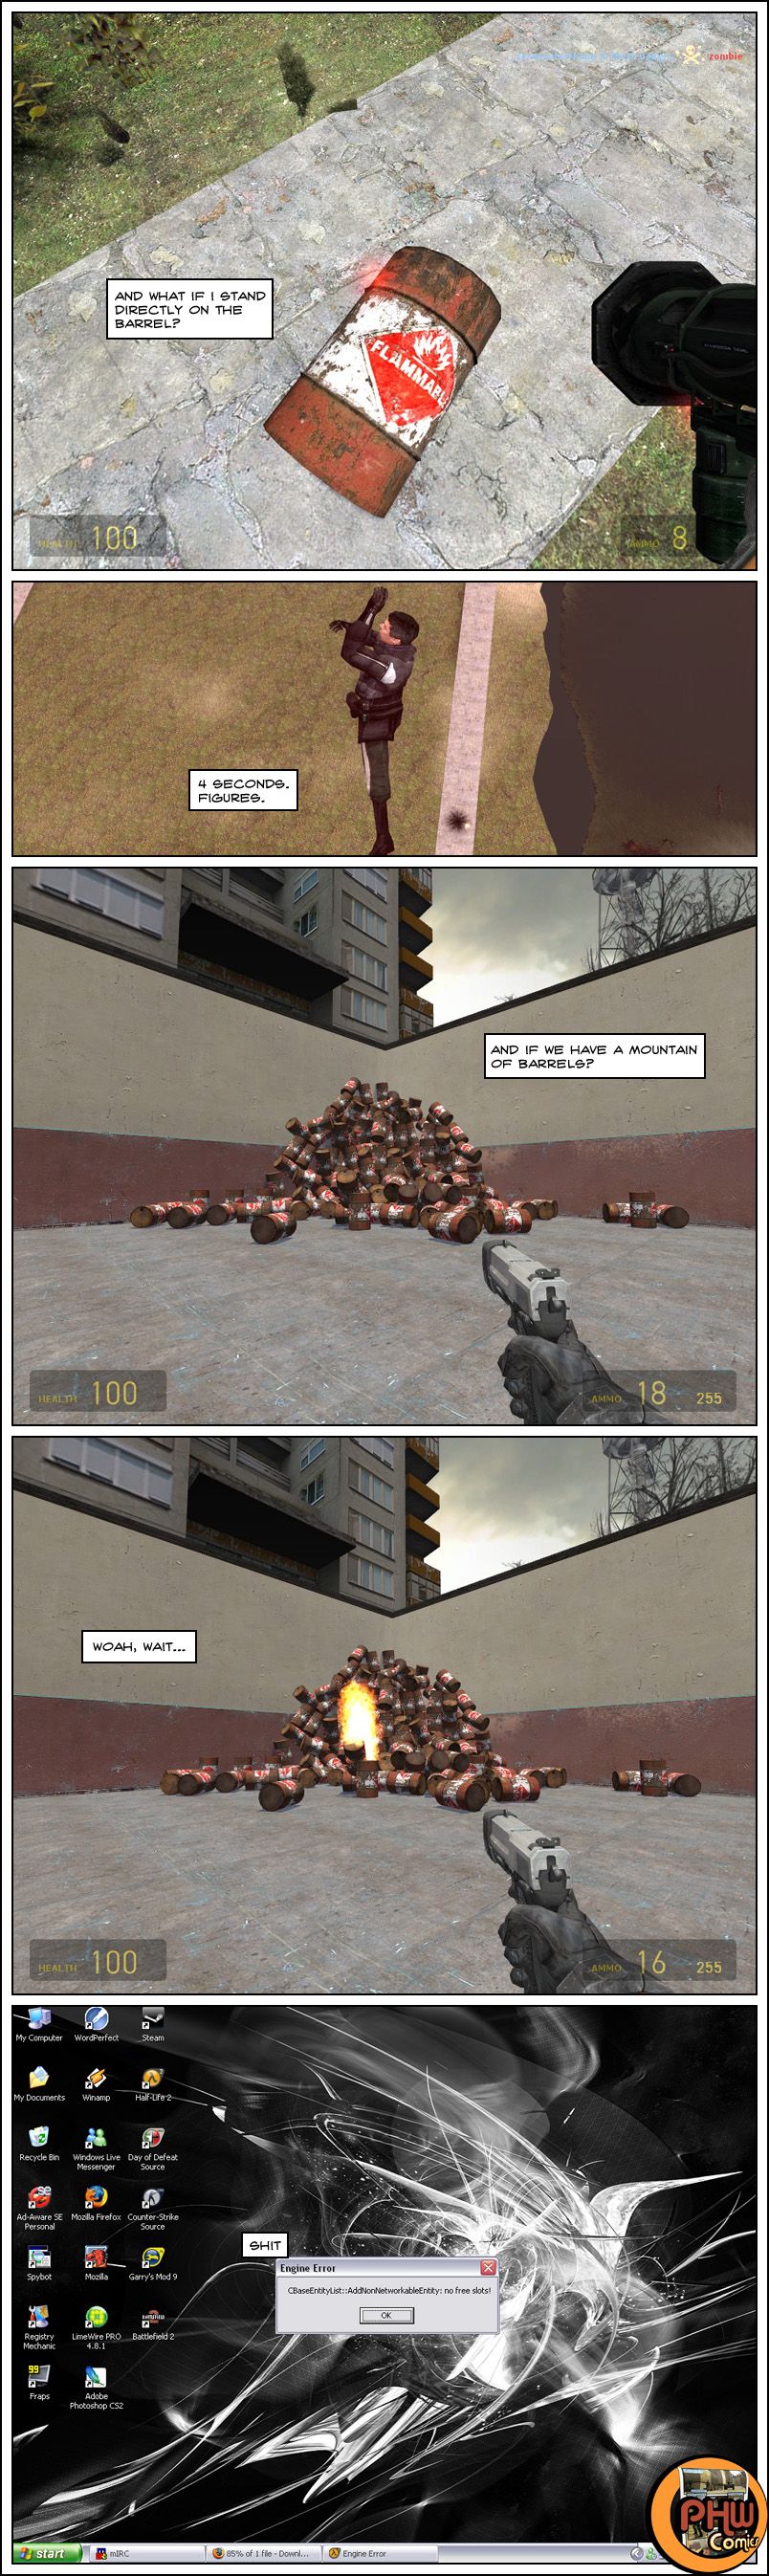 Clover tries standing directly on a red explosive barrel to see what happens. It takes 4 seconds for someone to explode it. Clover tests having a mountain of barrels, then, as one is set alight, he realizes his error and says whoa, wait, but it is too late. Garry's Mod crashes to desktop. The end.